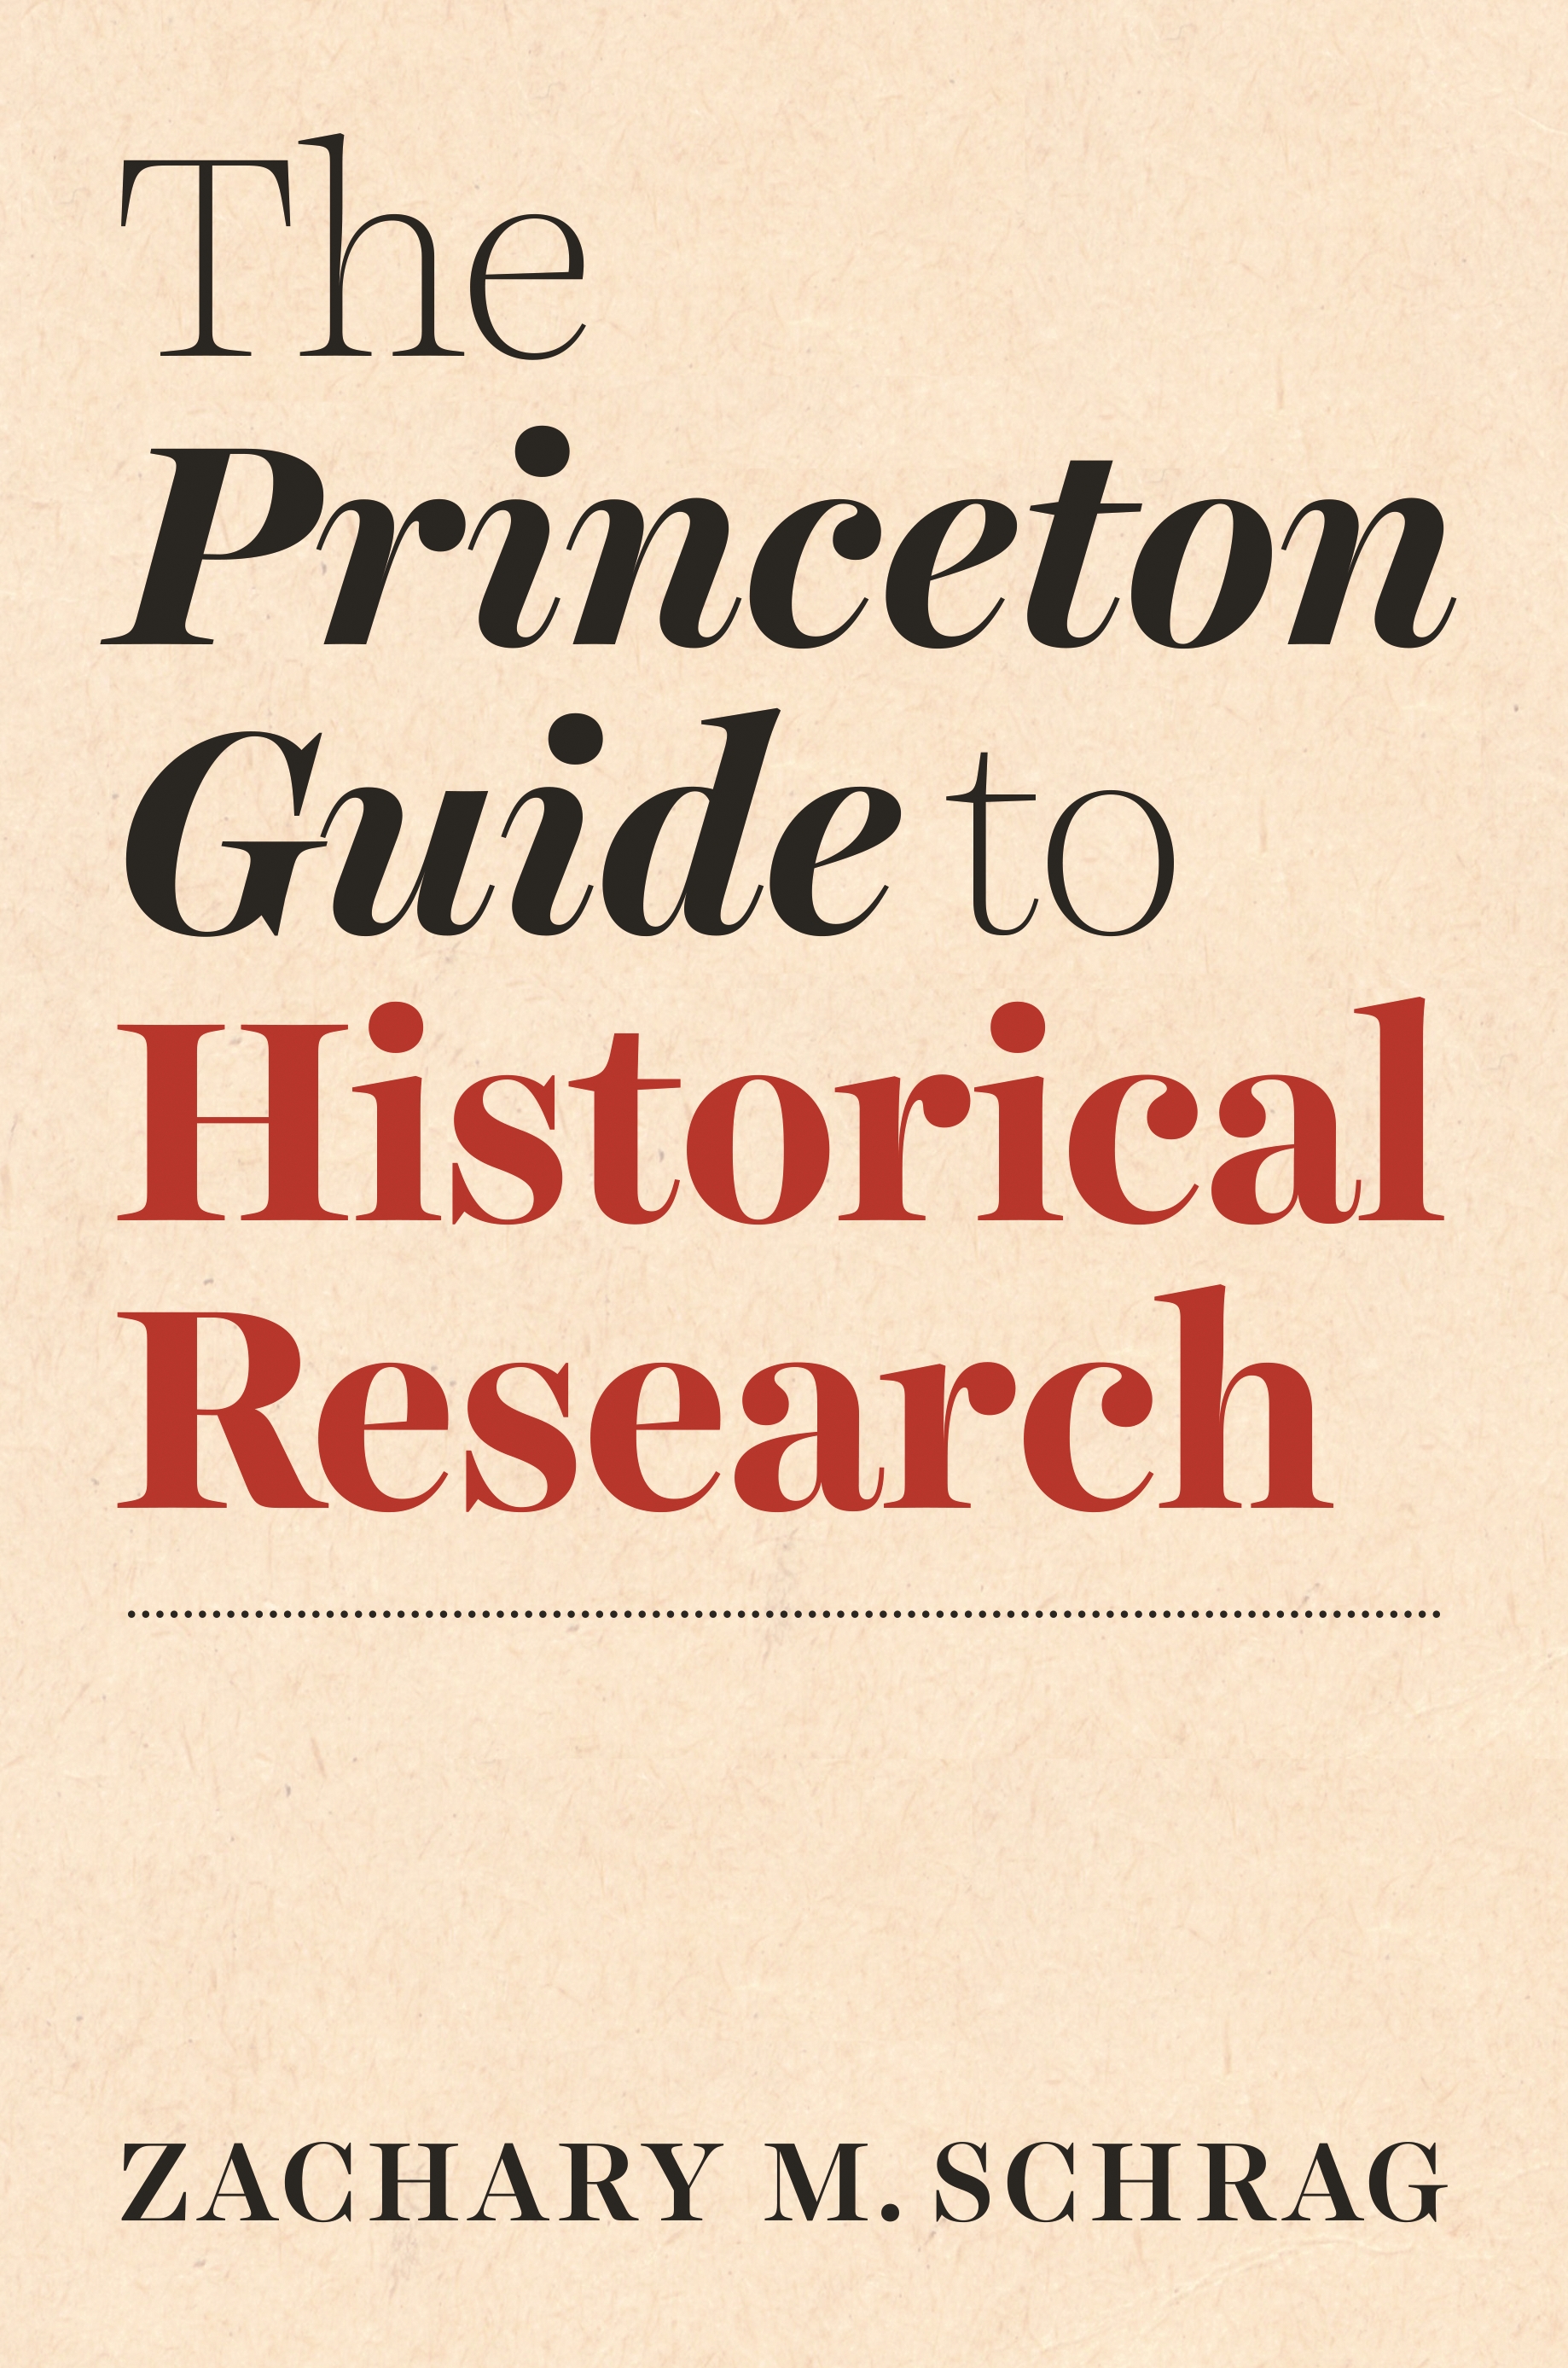 research methodology in history